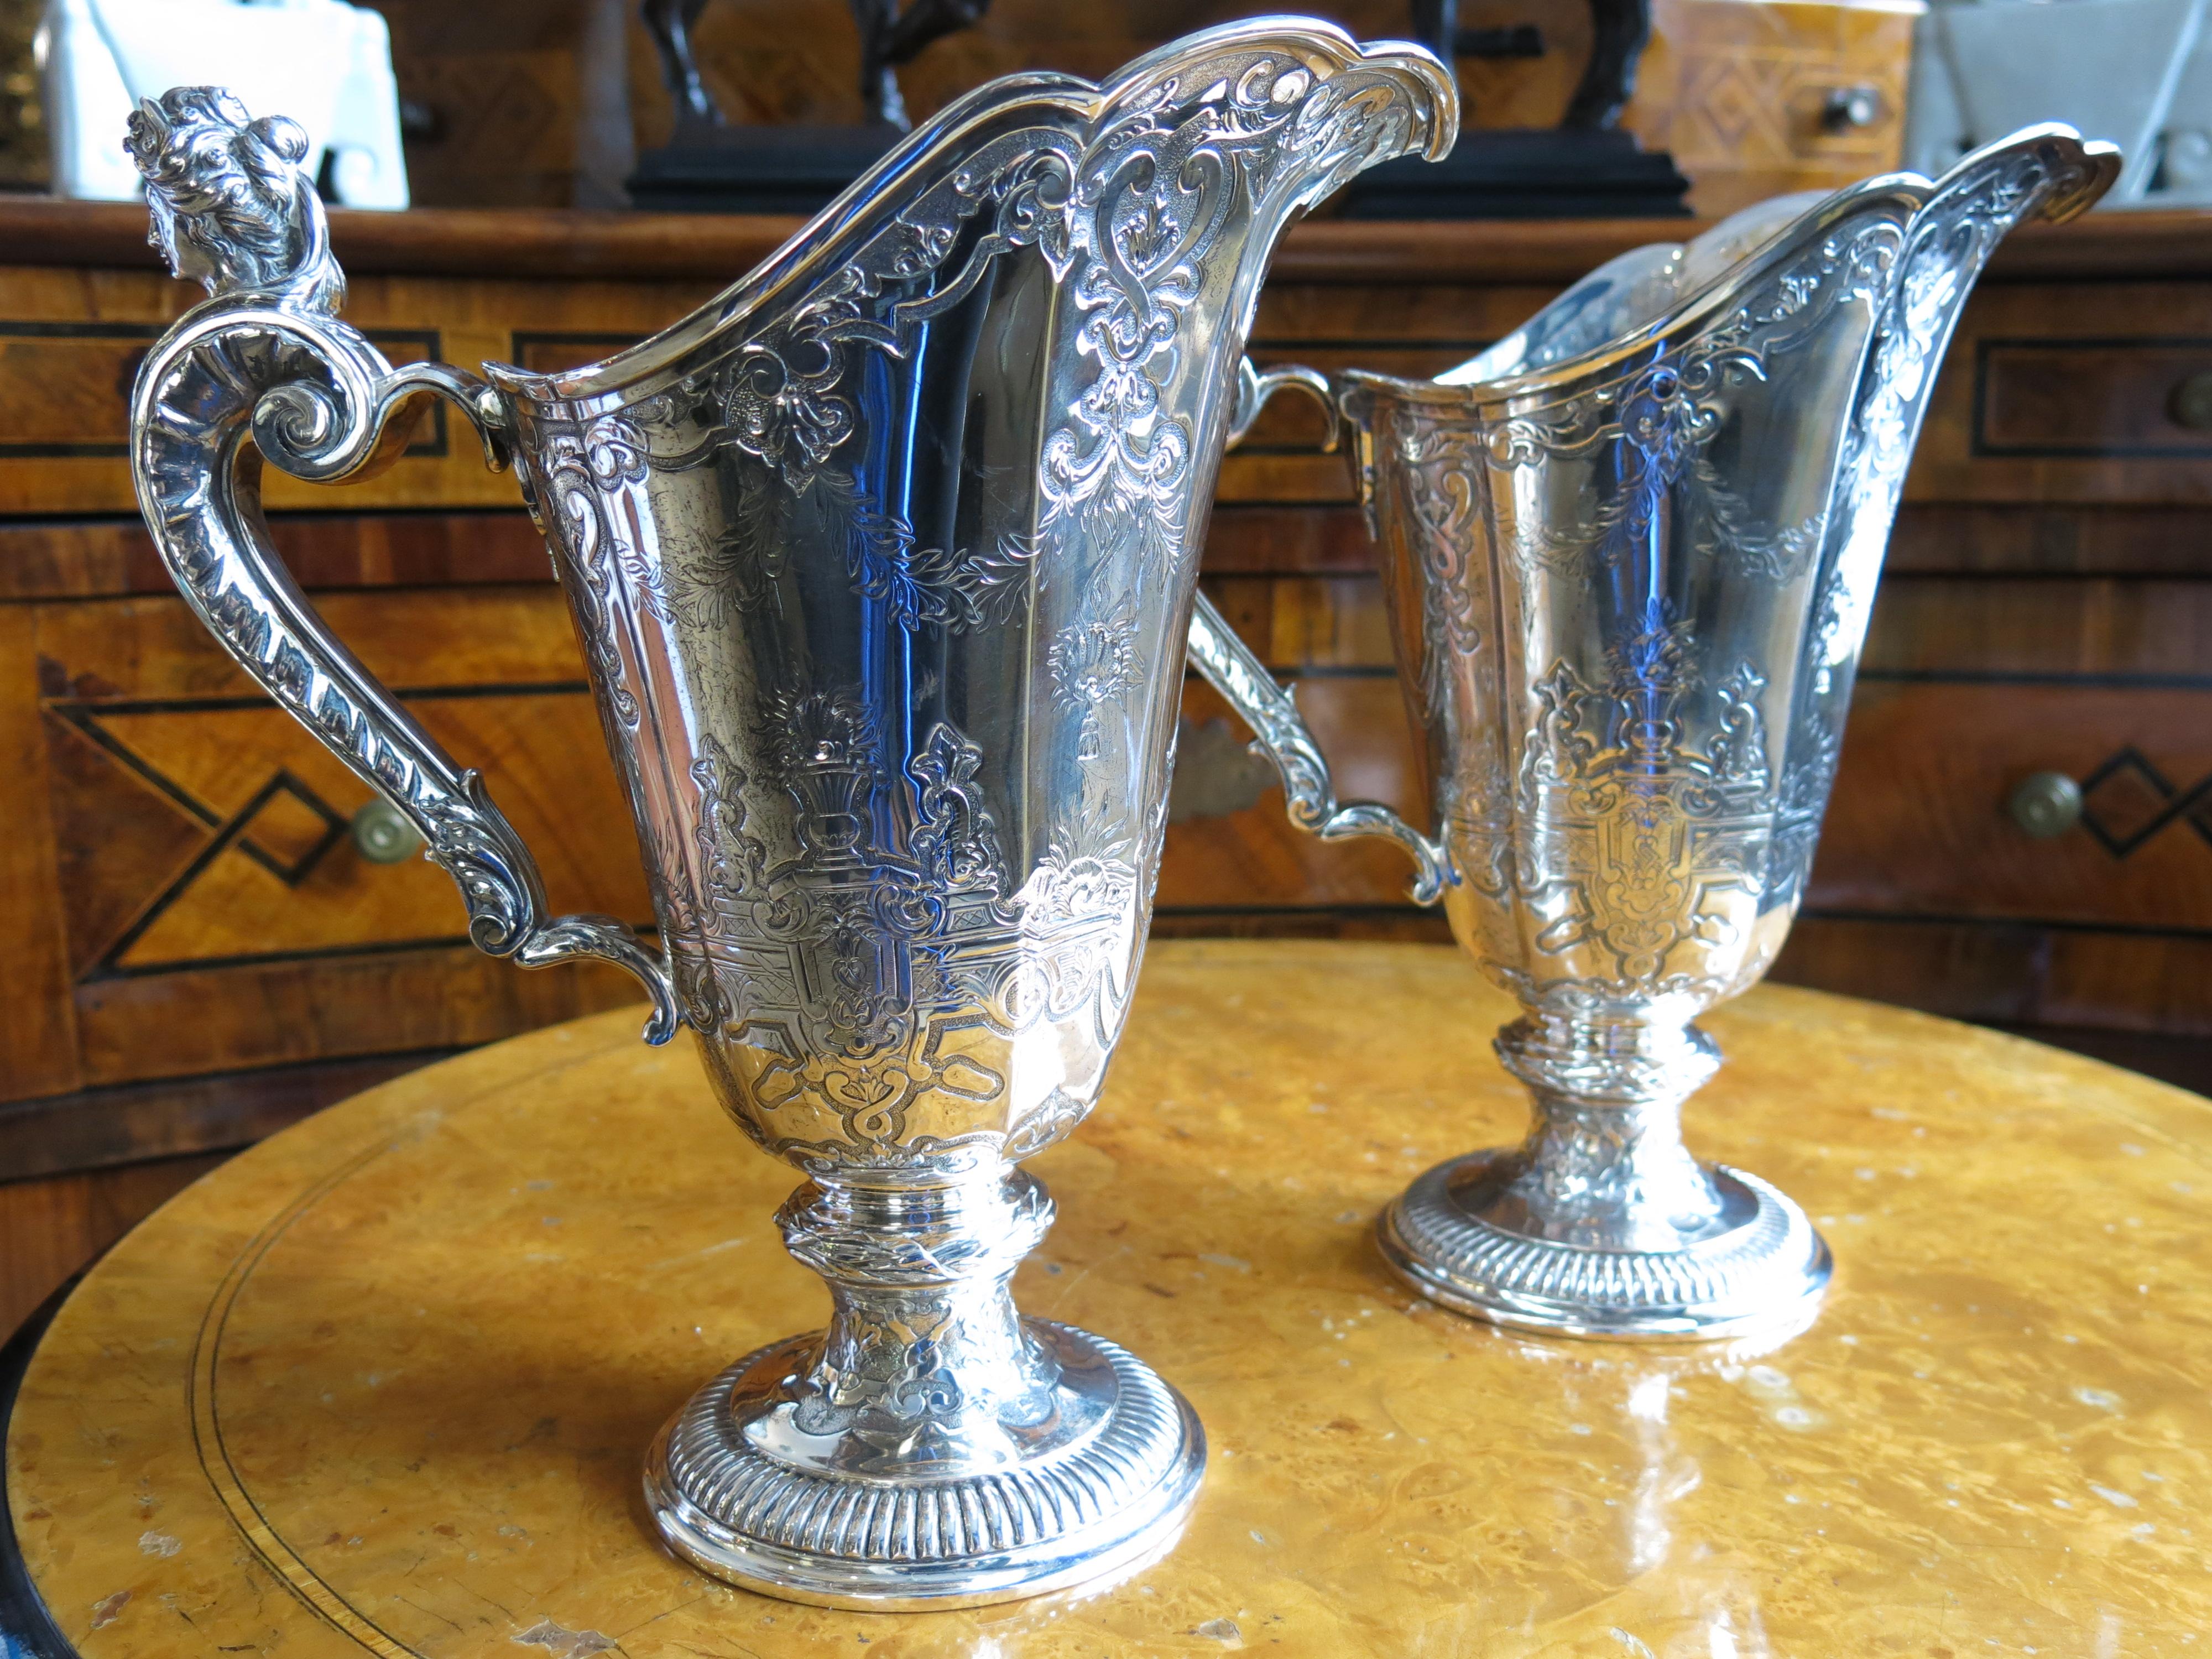 
Introducing a delightful pair of 19th-century French silver water jars, a testament to the exquisite craftsmanship and elegance of the era. These stunning pieces boast intricate silverwork, showcasing the mastery of French artisans in the 1800s.